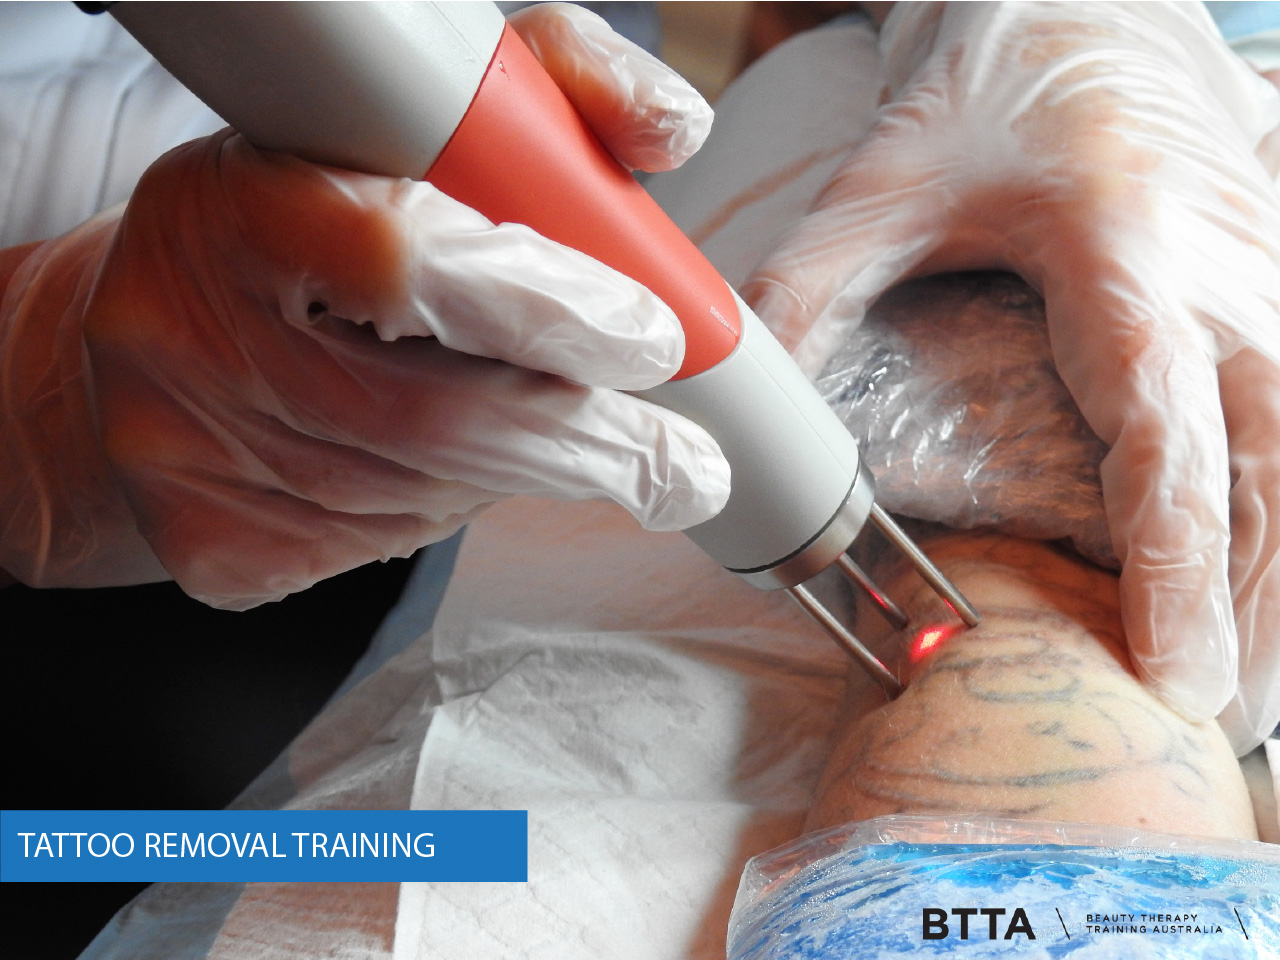 A Laser Academy Tattoo Removal Training  Littleton CO